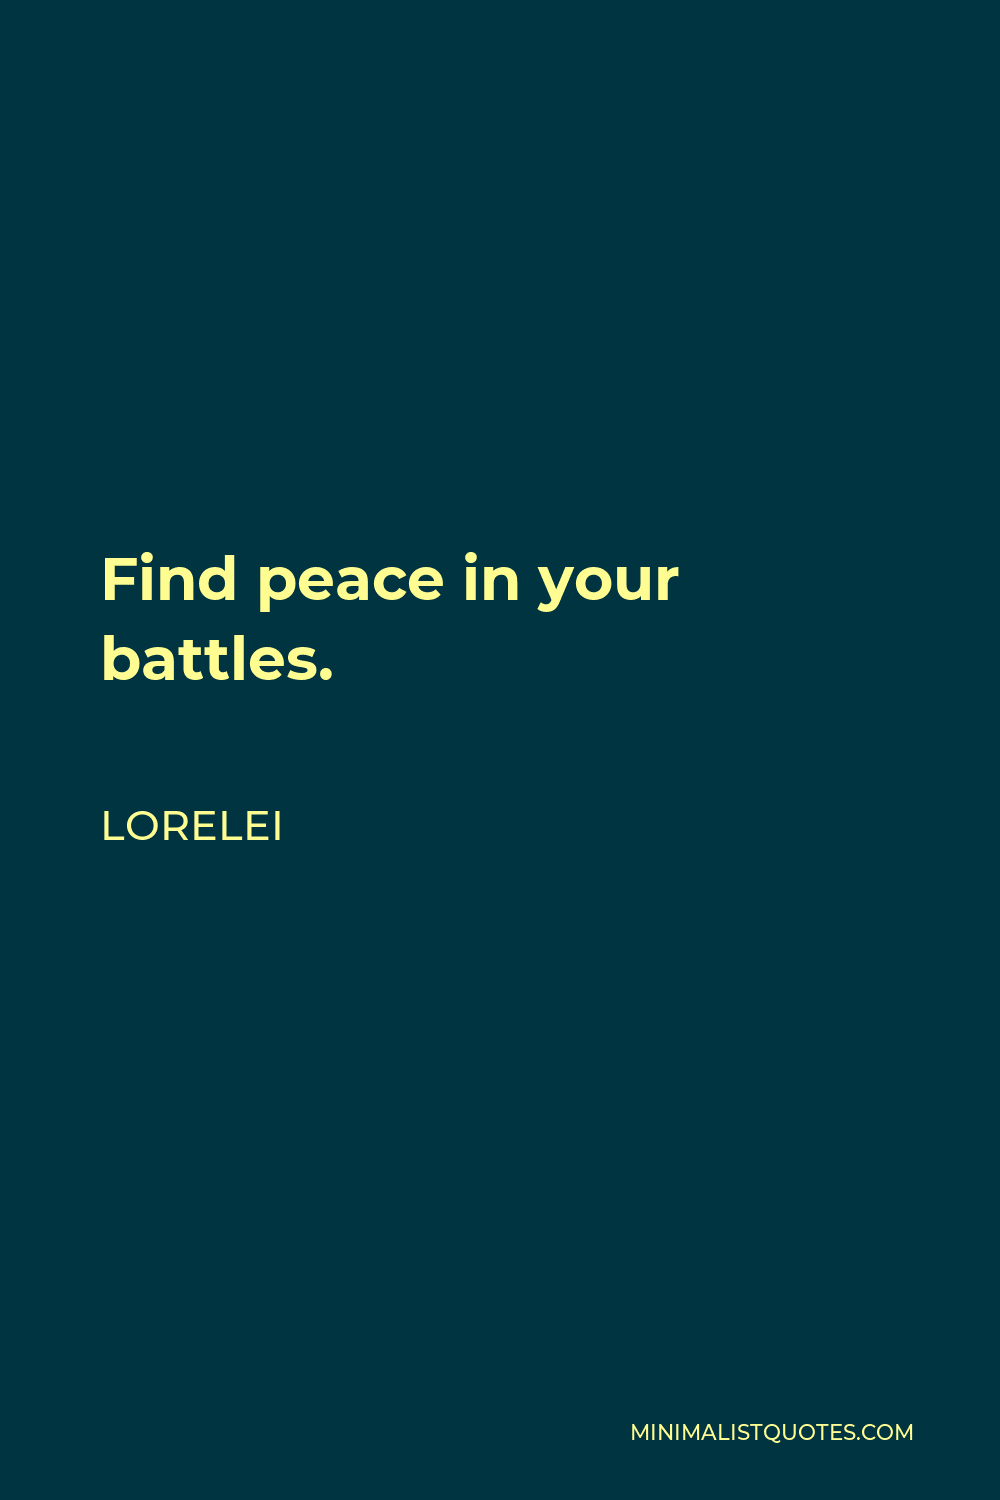 Lorelei Quote - Find peace in your battles.